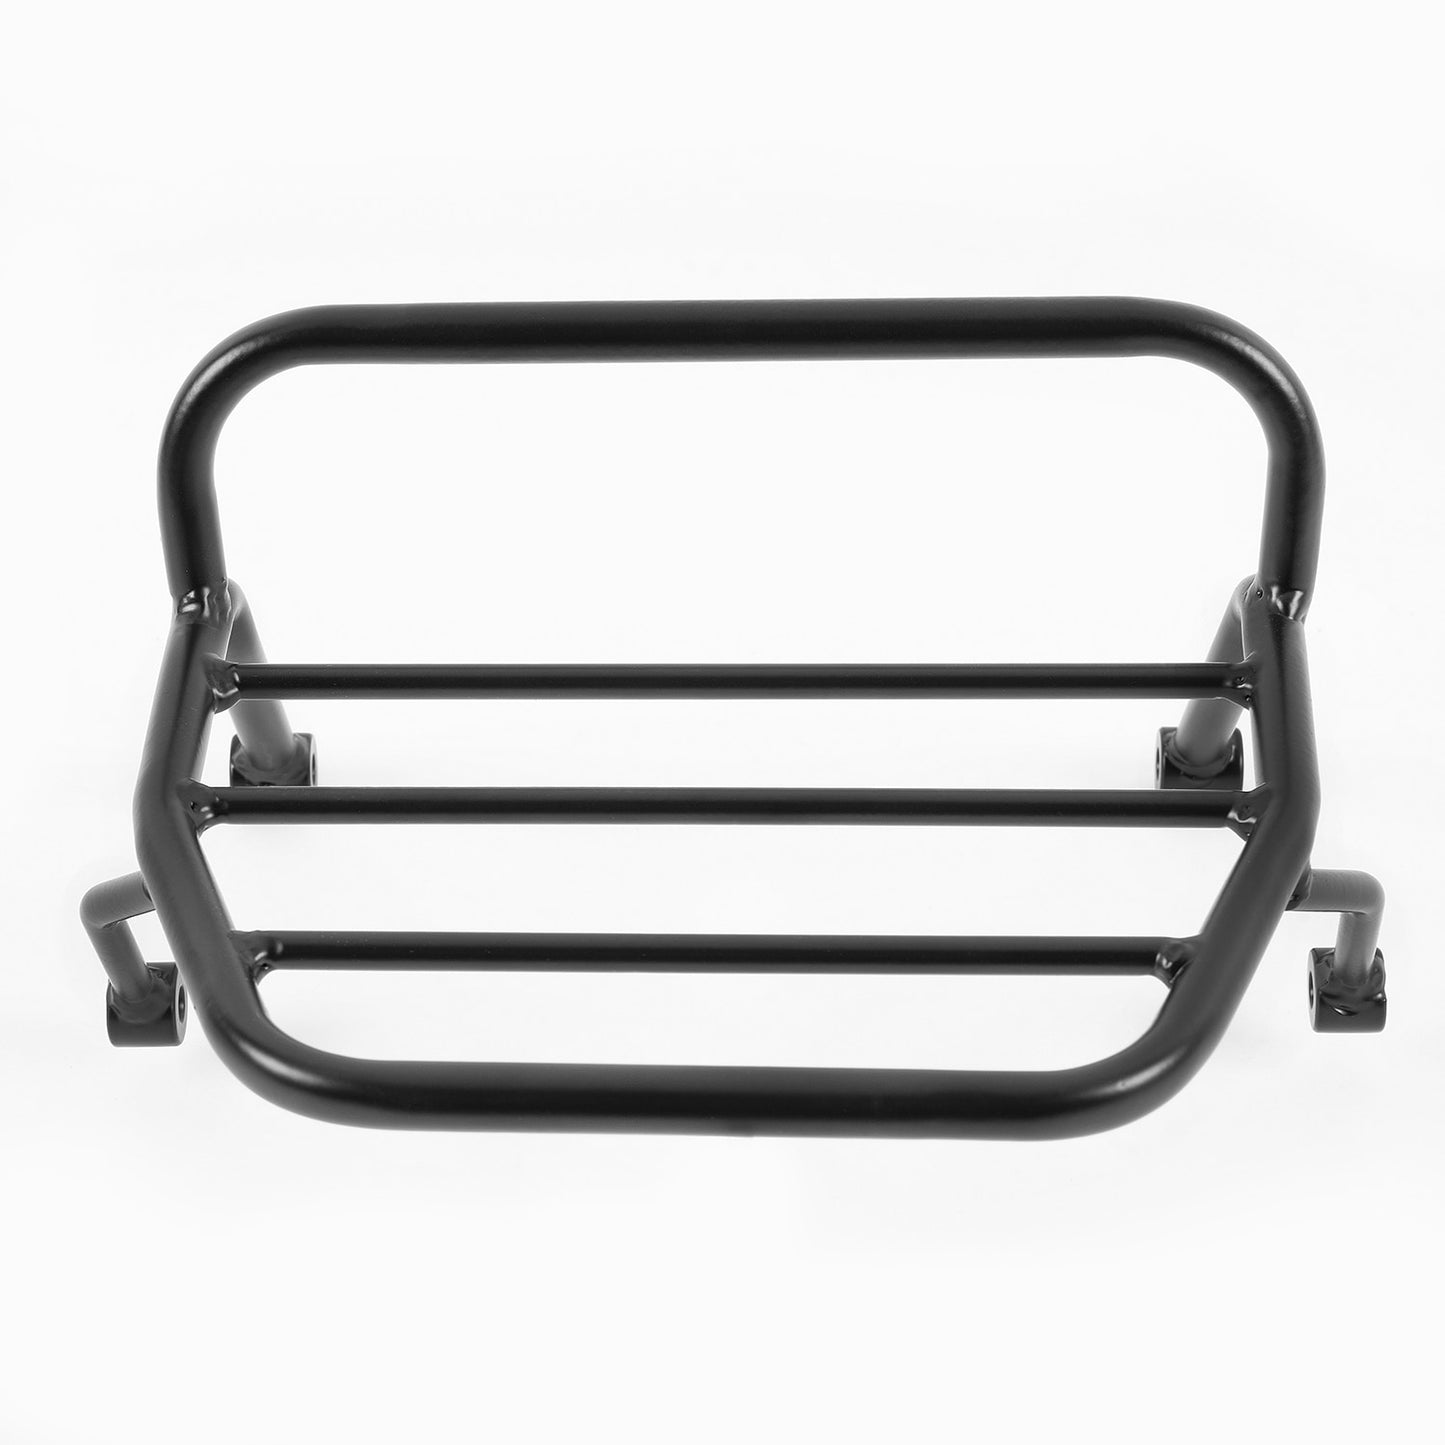 Wolfline CT125 Front Driver Shelf  Luggage Rack for Honda Hunter Cub CT 125 2020 2021 2022 2023 Motorcycle Bracket Accessories